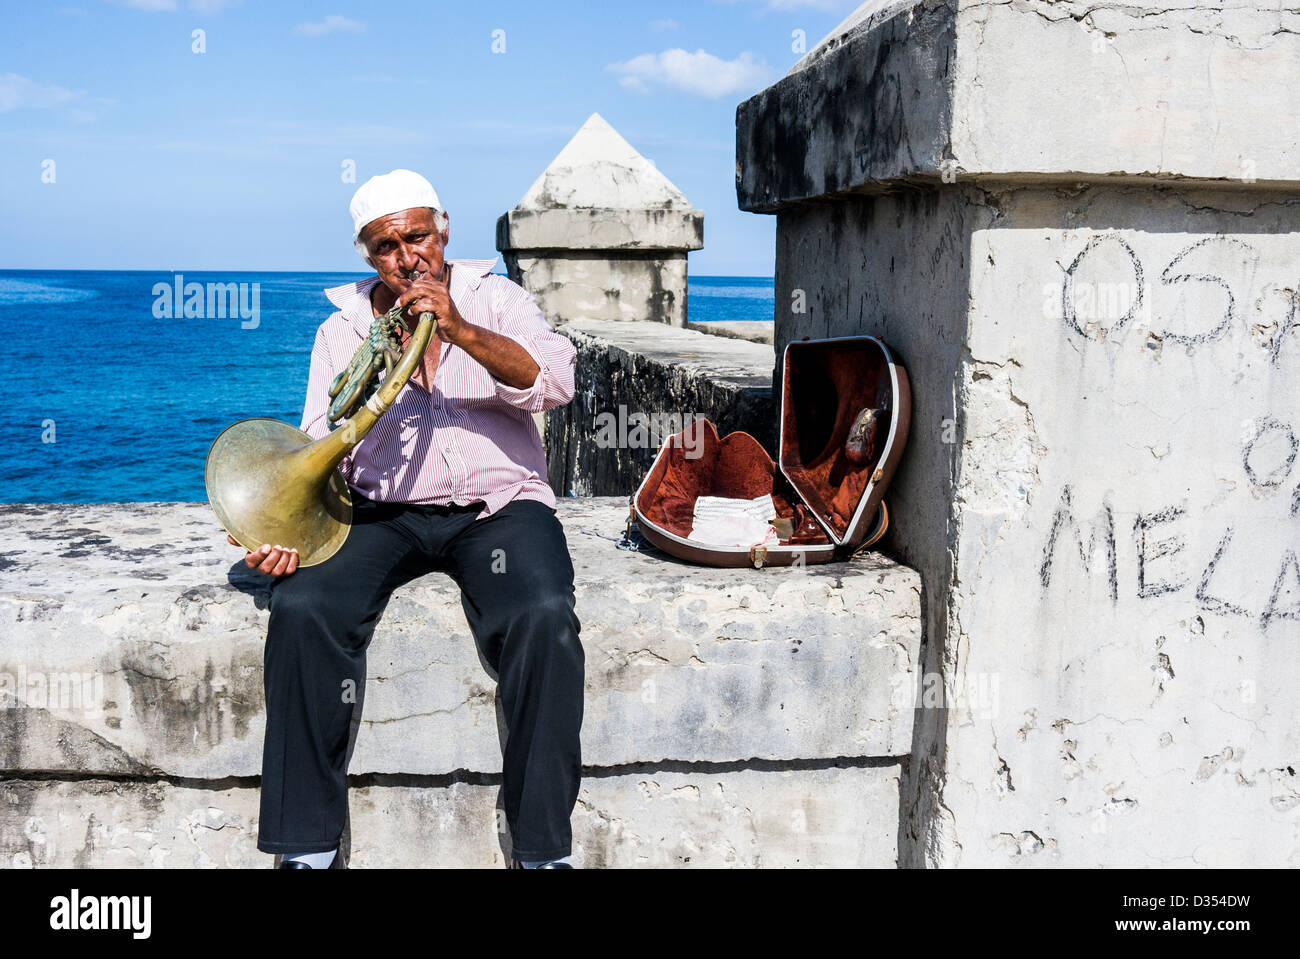 Man playing the french horn for pesos from tourists at the Malecon, Havana, Cuba Stock Photo